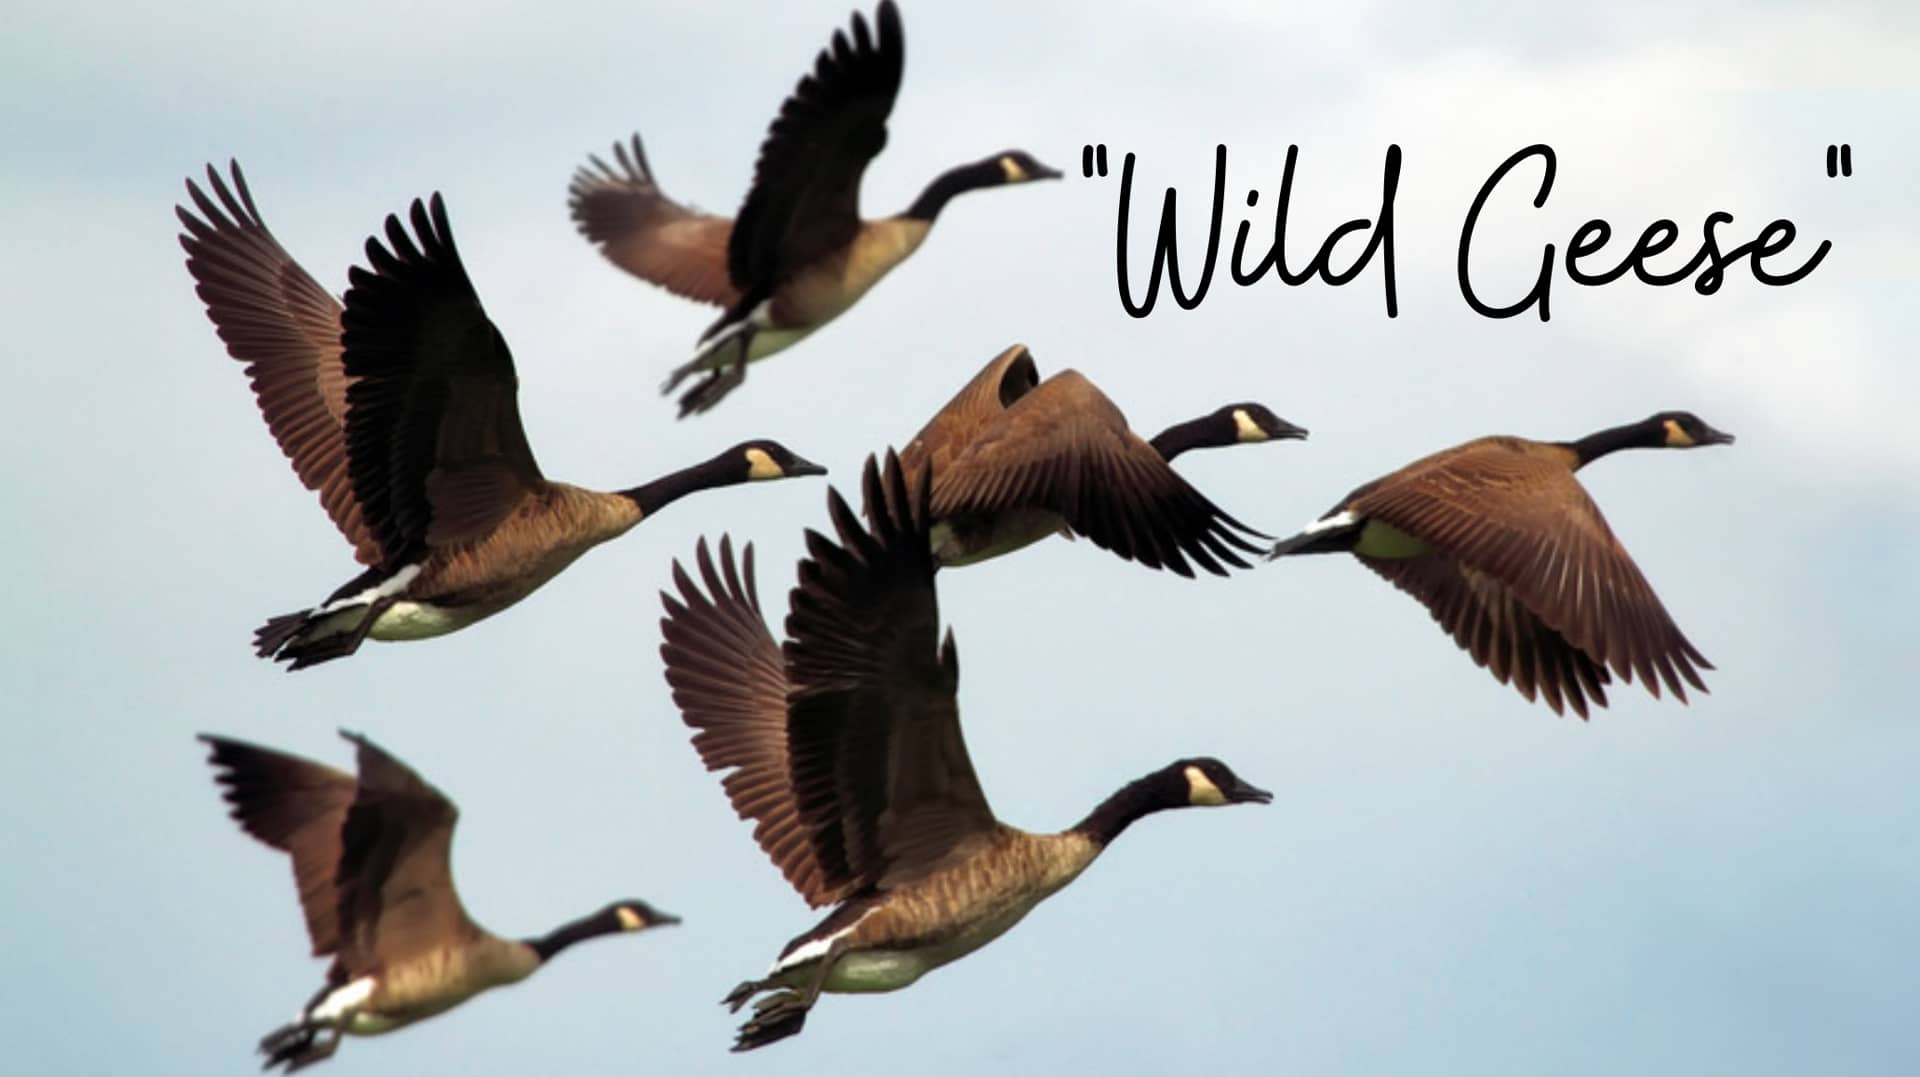 WILD GEESE read by Barbara Lewis on Vimeo